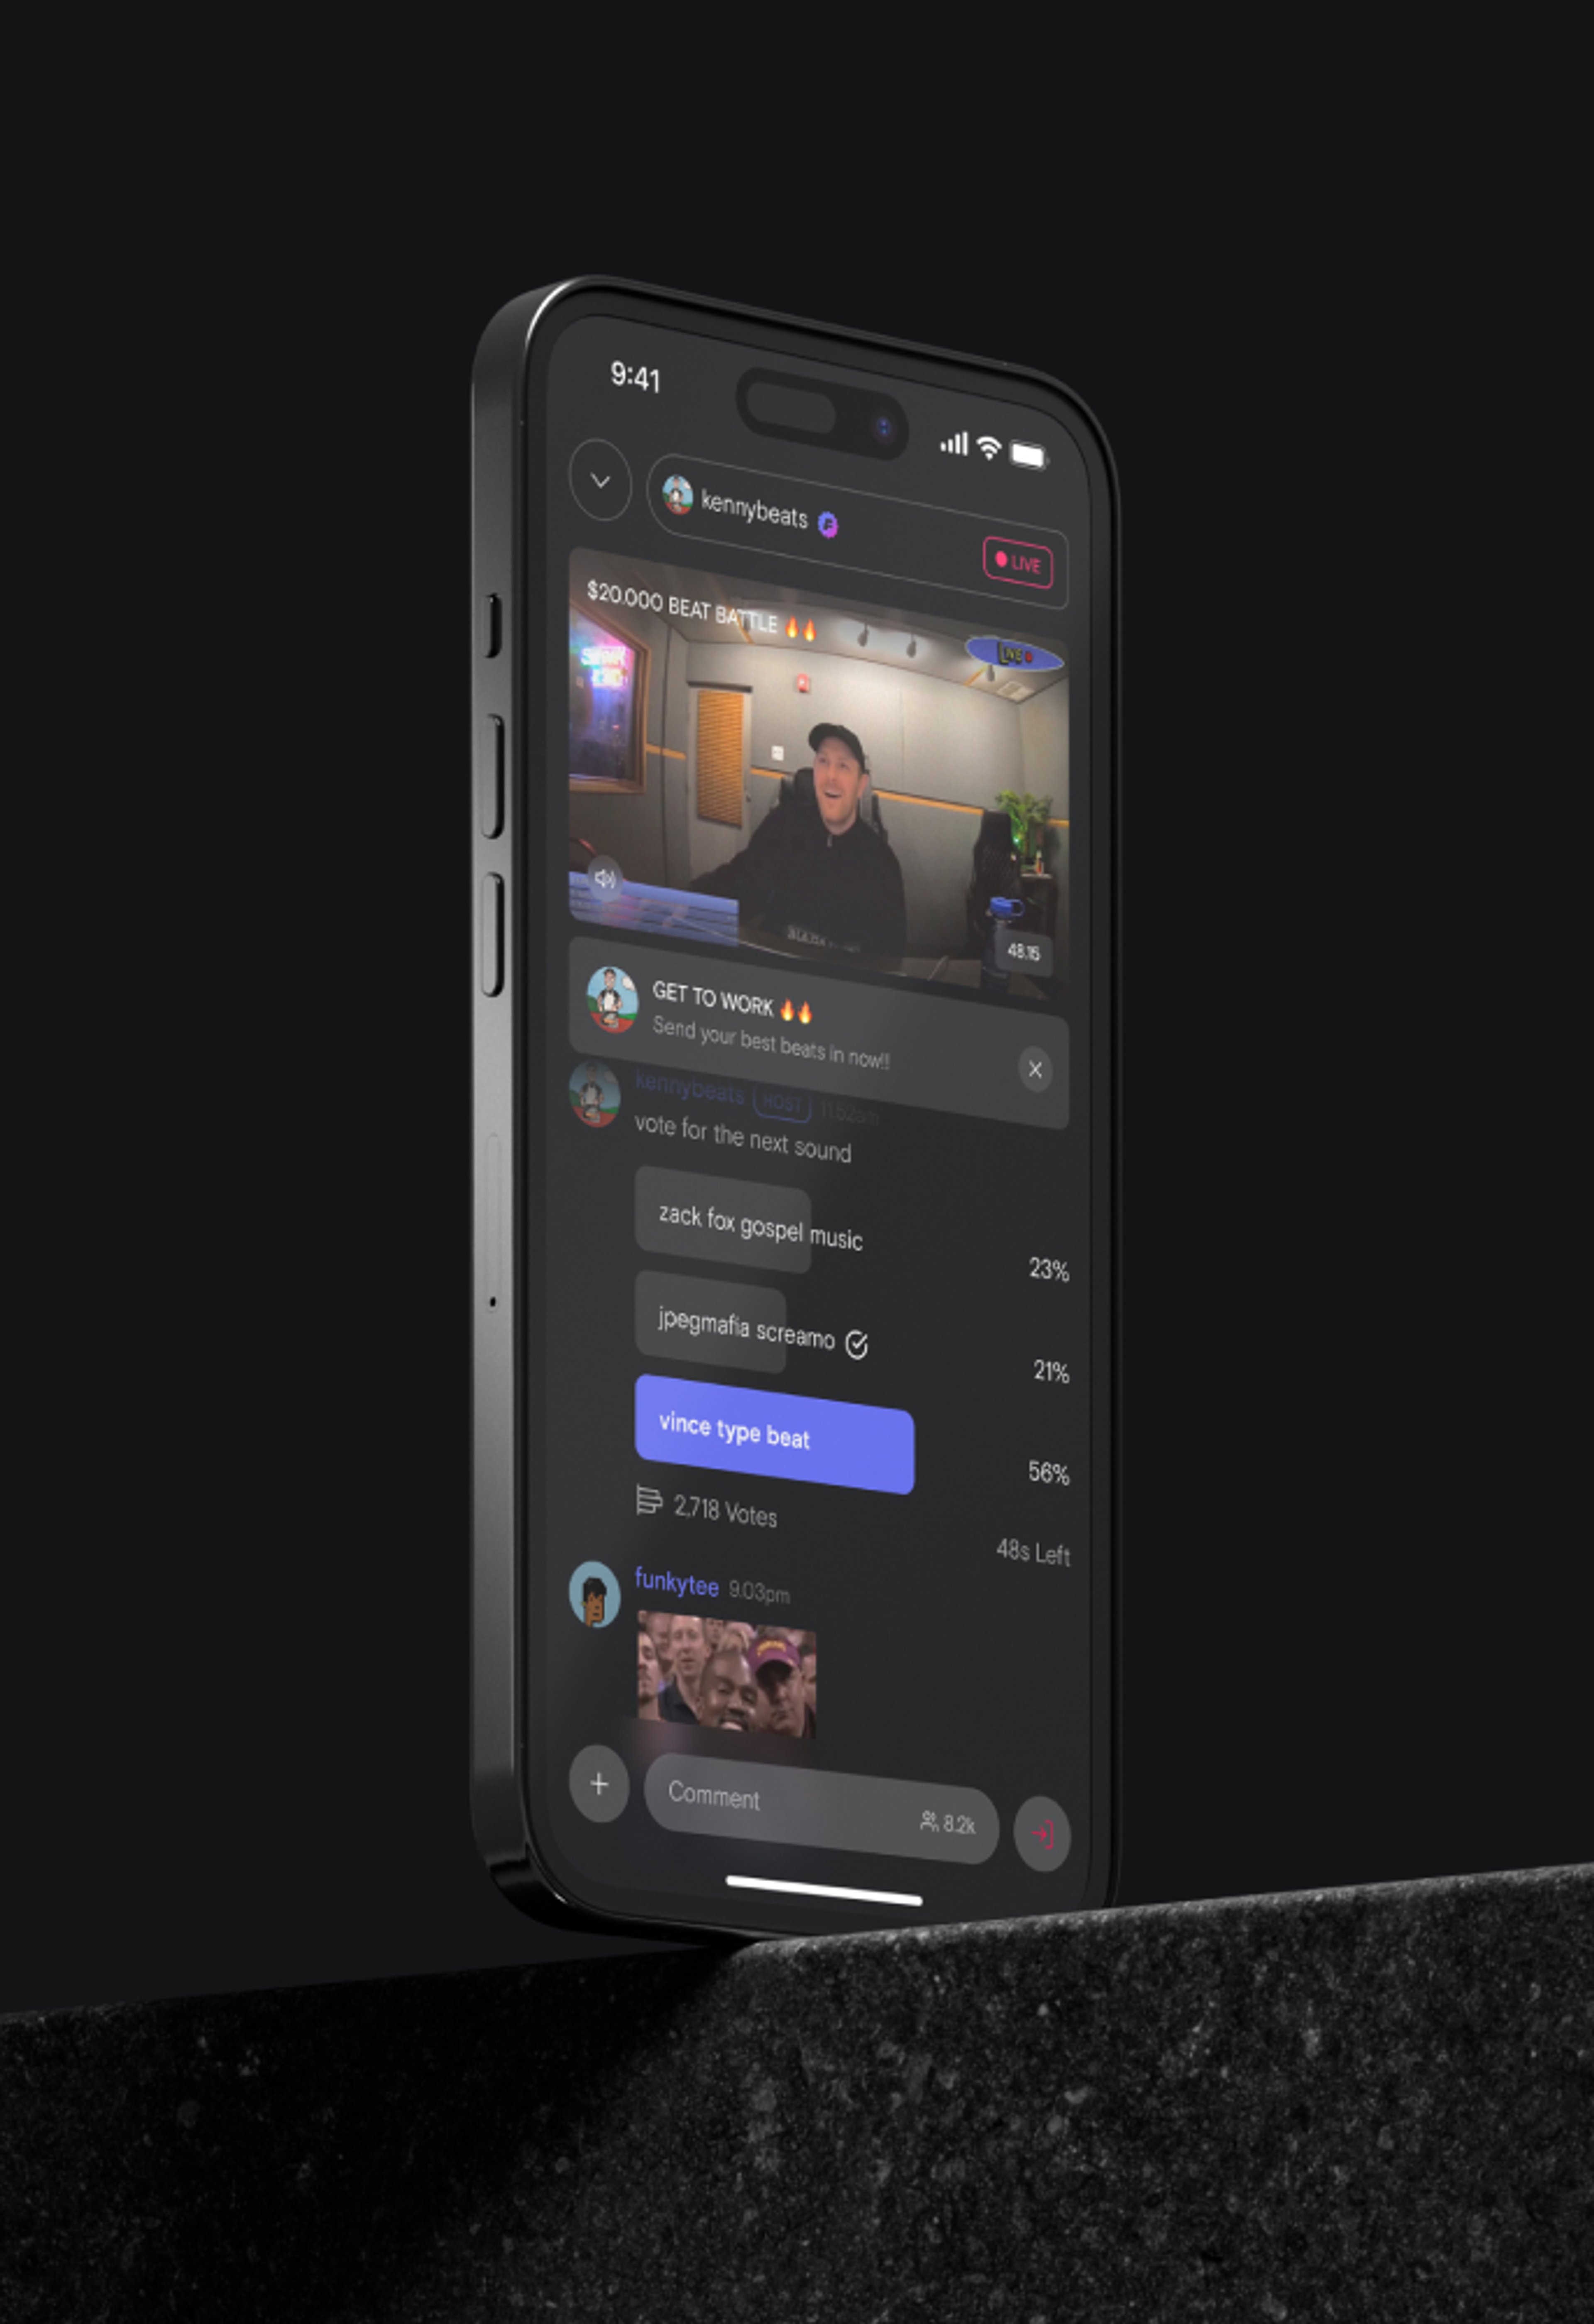 Photo of an iPhone with the Found live streaming page showing